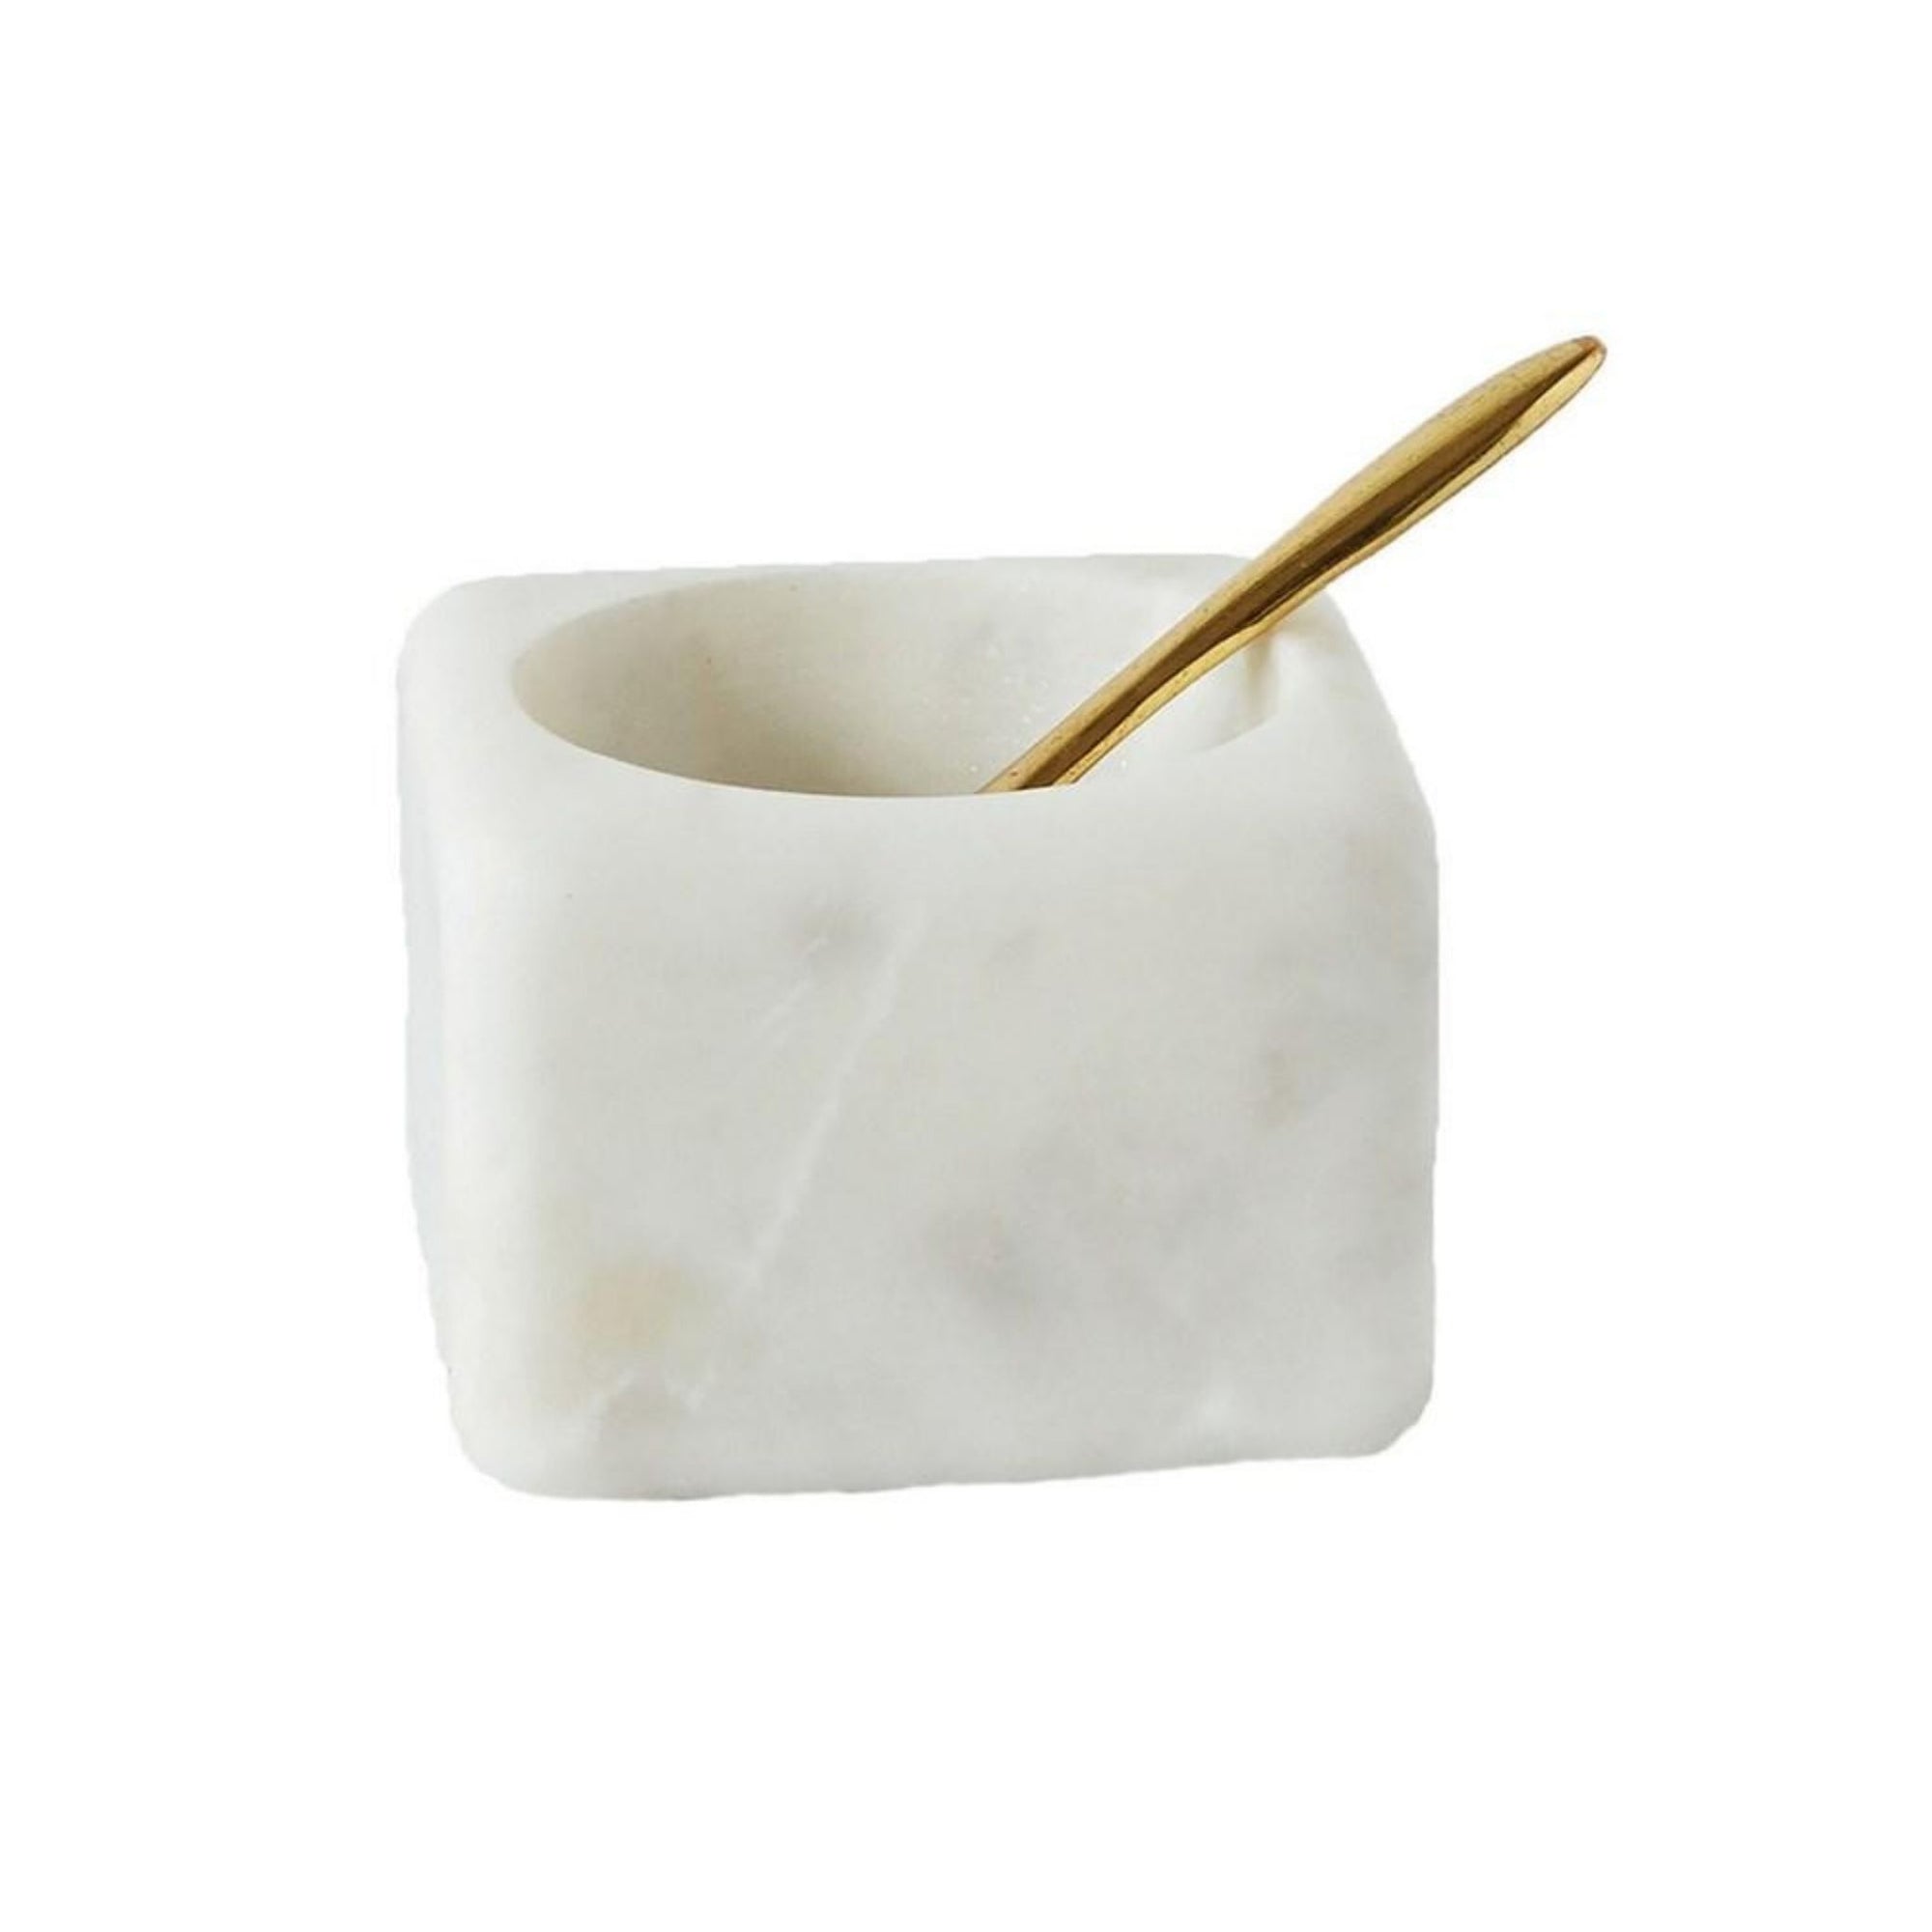 Marble Salt Dish with Brass Spoon